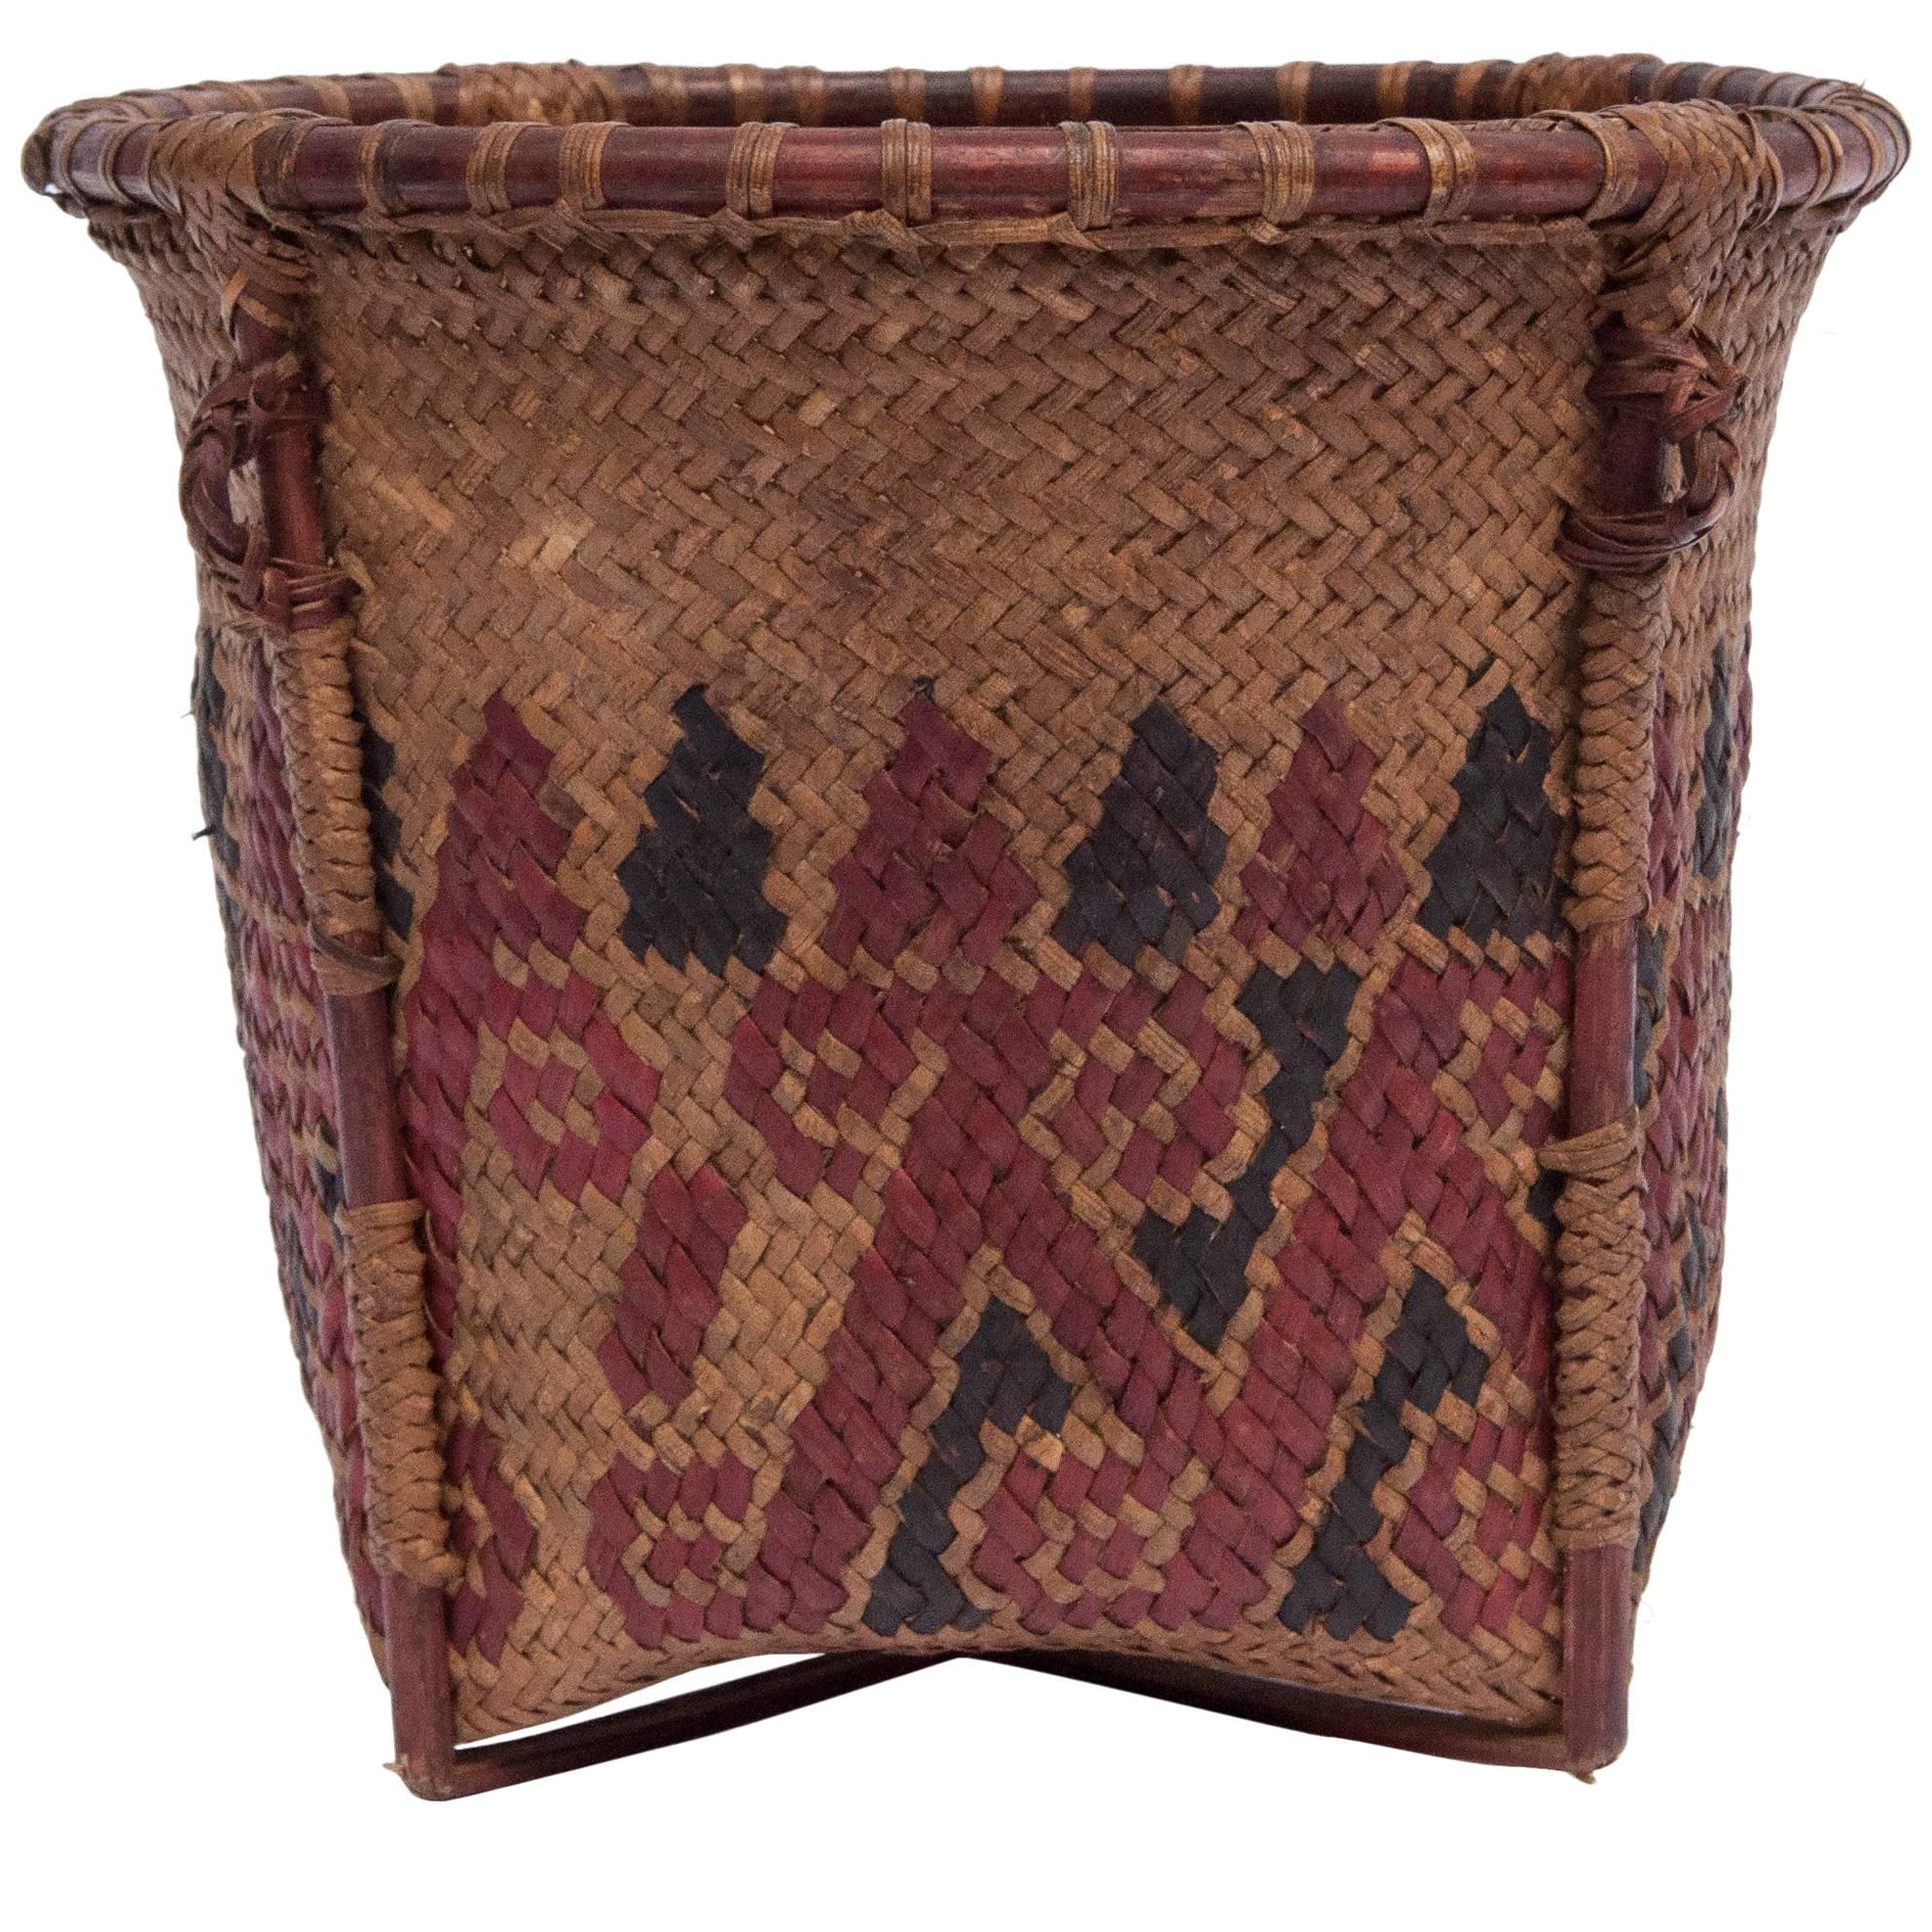 Small Vintage Collecting Basket with Colored Design, Borneo, Mid-20th Century